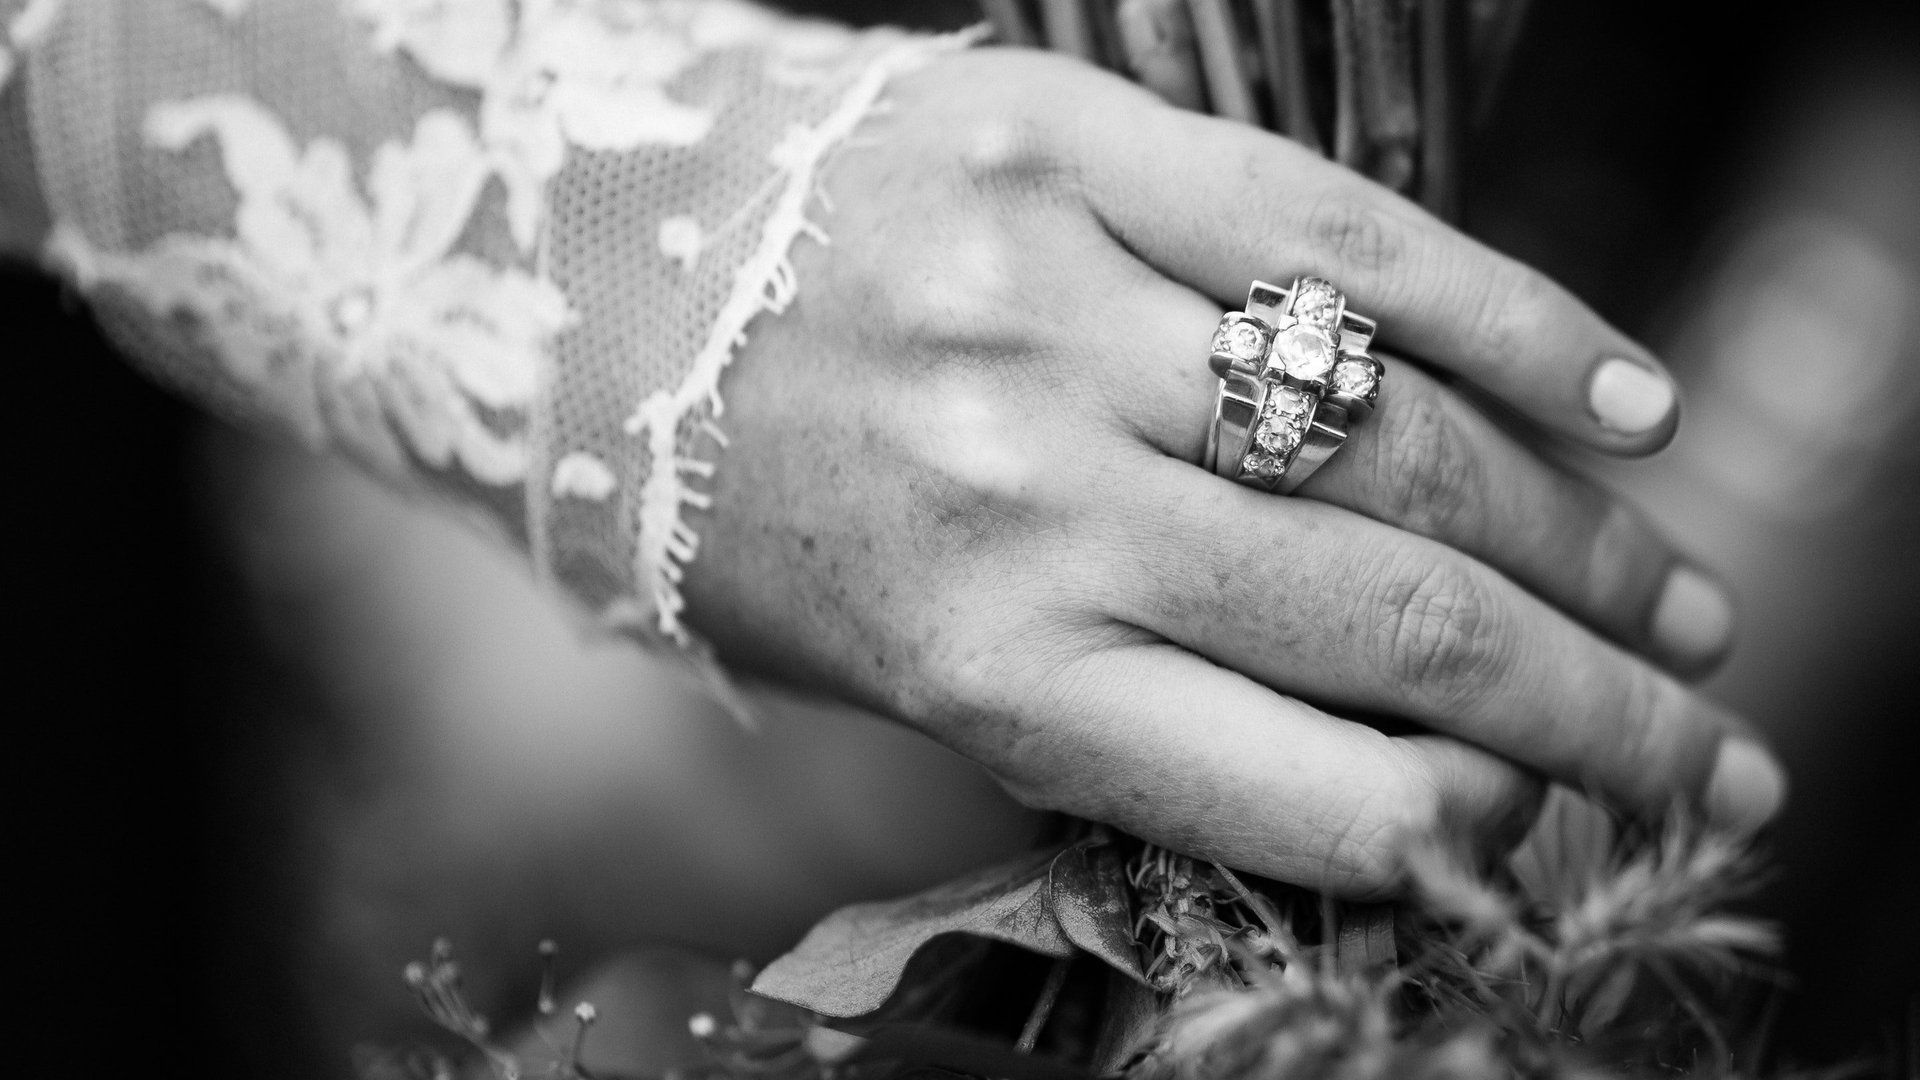 A black and white photo of a bride 's hand with a wedding ring on it.